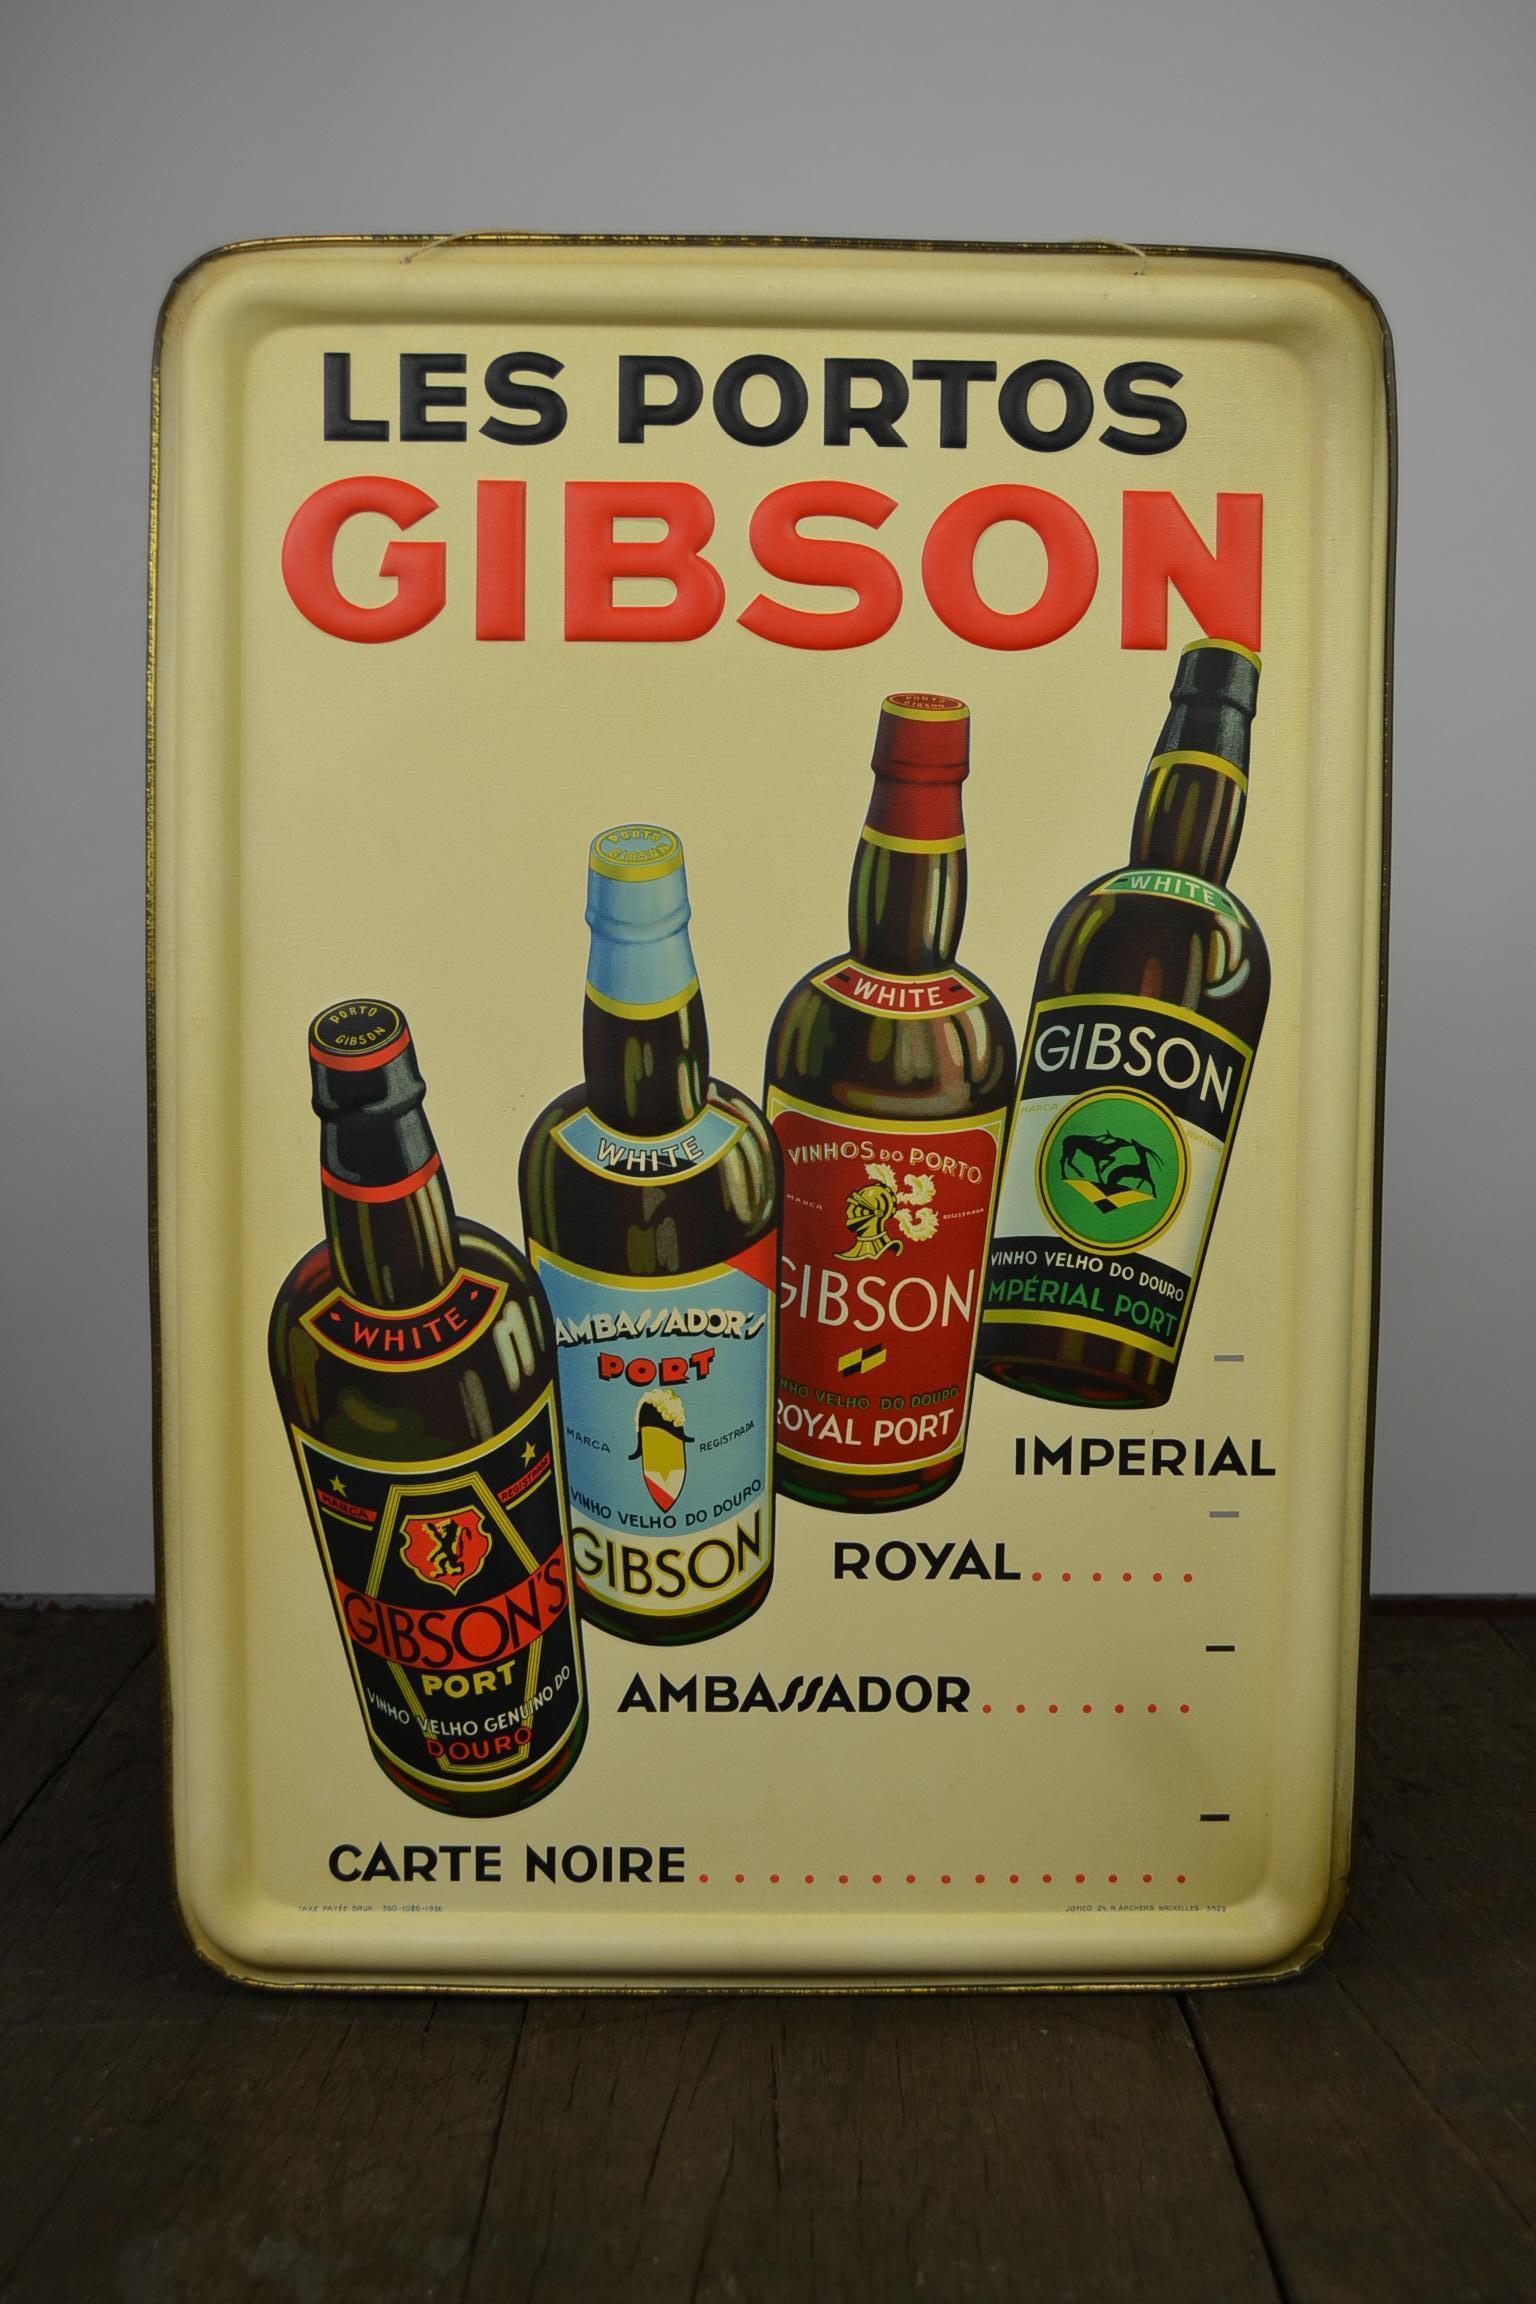 1936 Tin Sign for Les Portos Gibson, Appetizer Drink 12